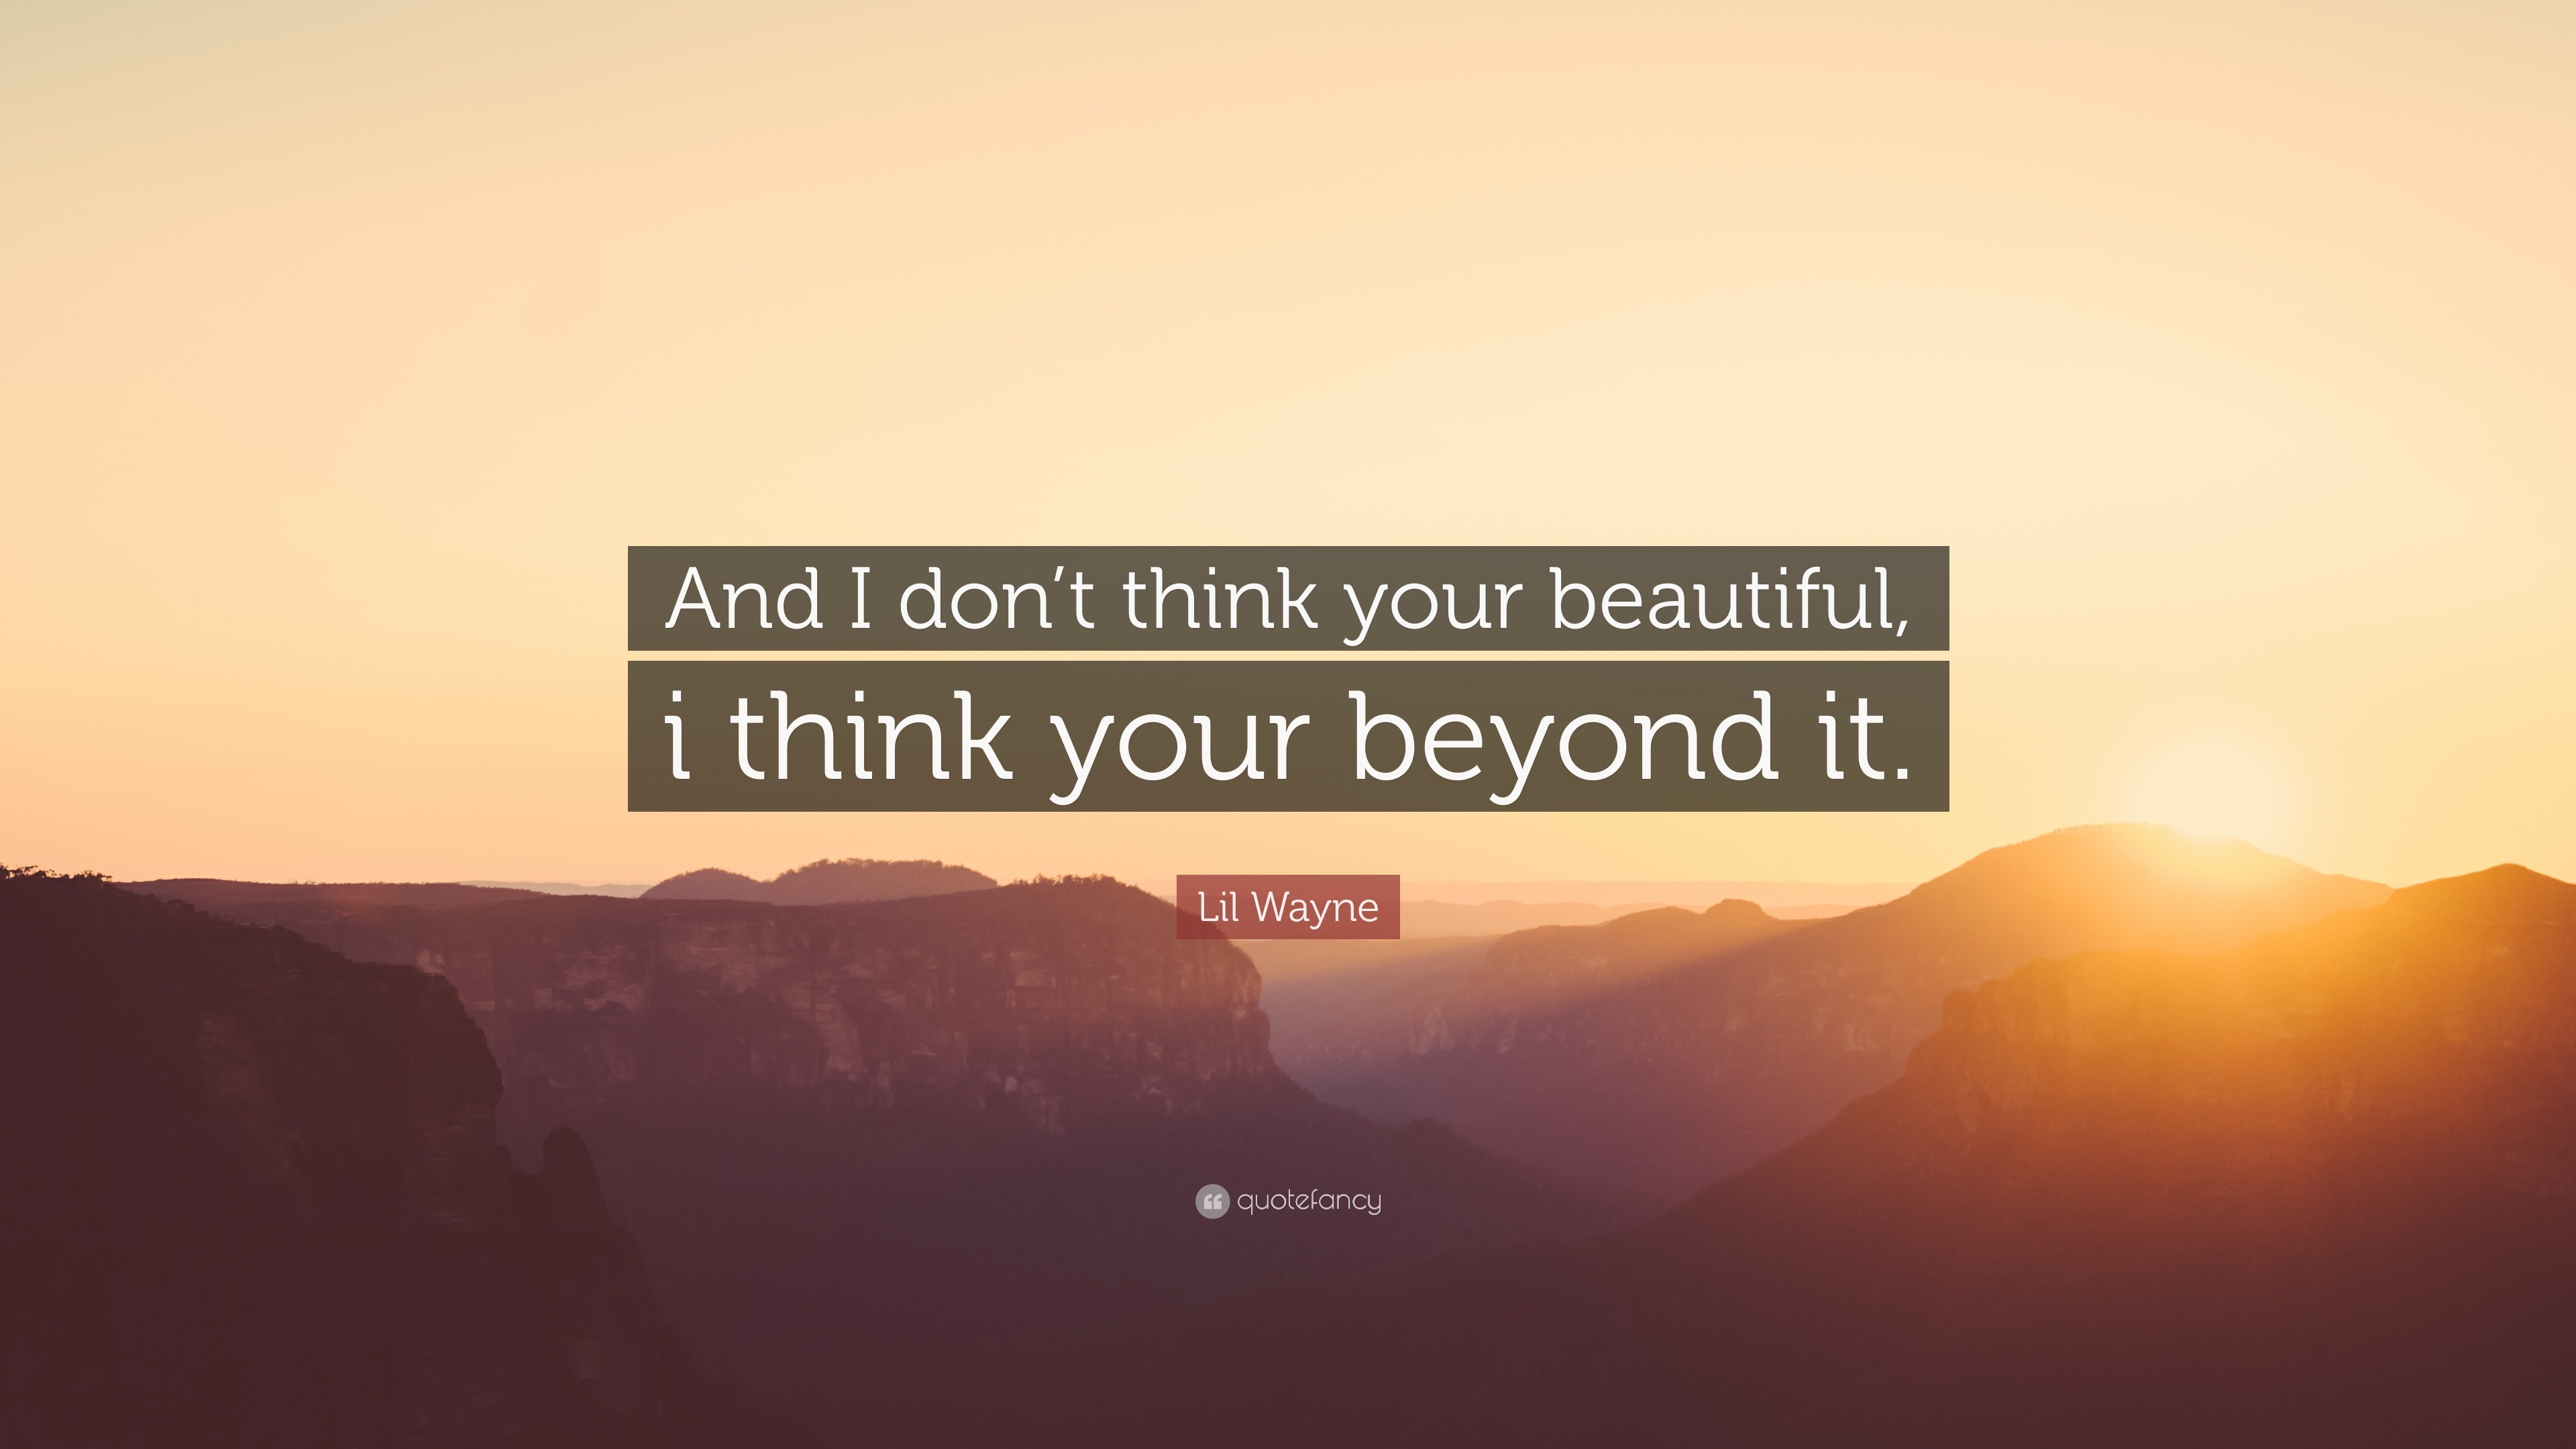 Details about   I don't think you're beautiful you're beyond it Lil Wayne Vinyl Wall Decal 22x8 